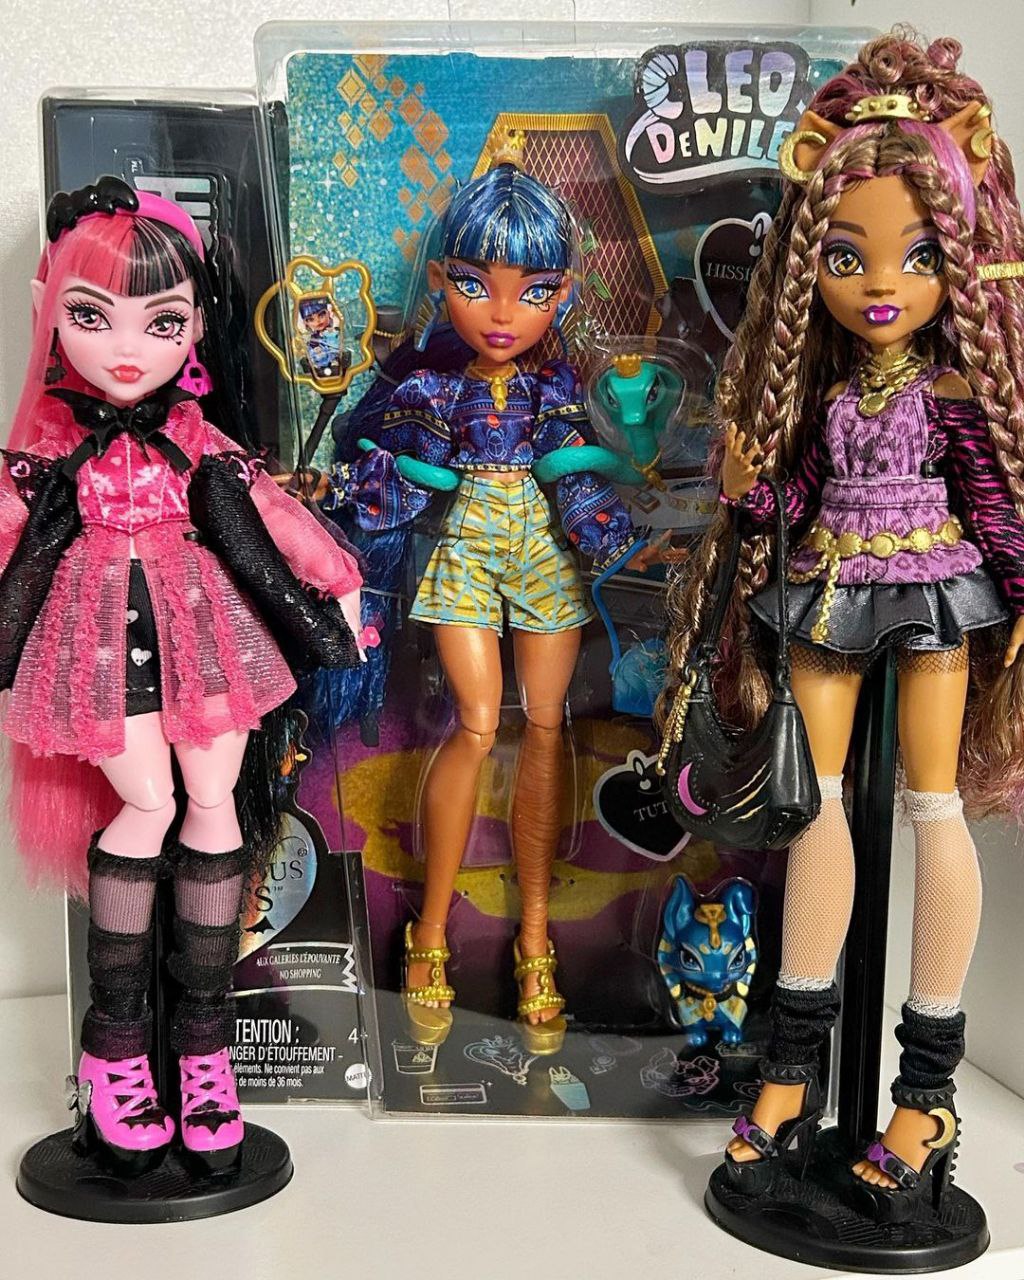 Lot of 2 Monster High Doll Cleo De Nile & Clawdeen Wolf with Pet - We-R-Toys